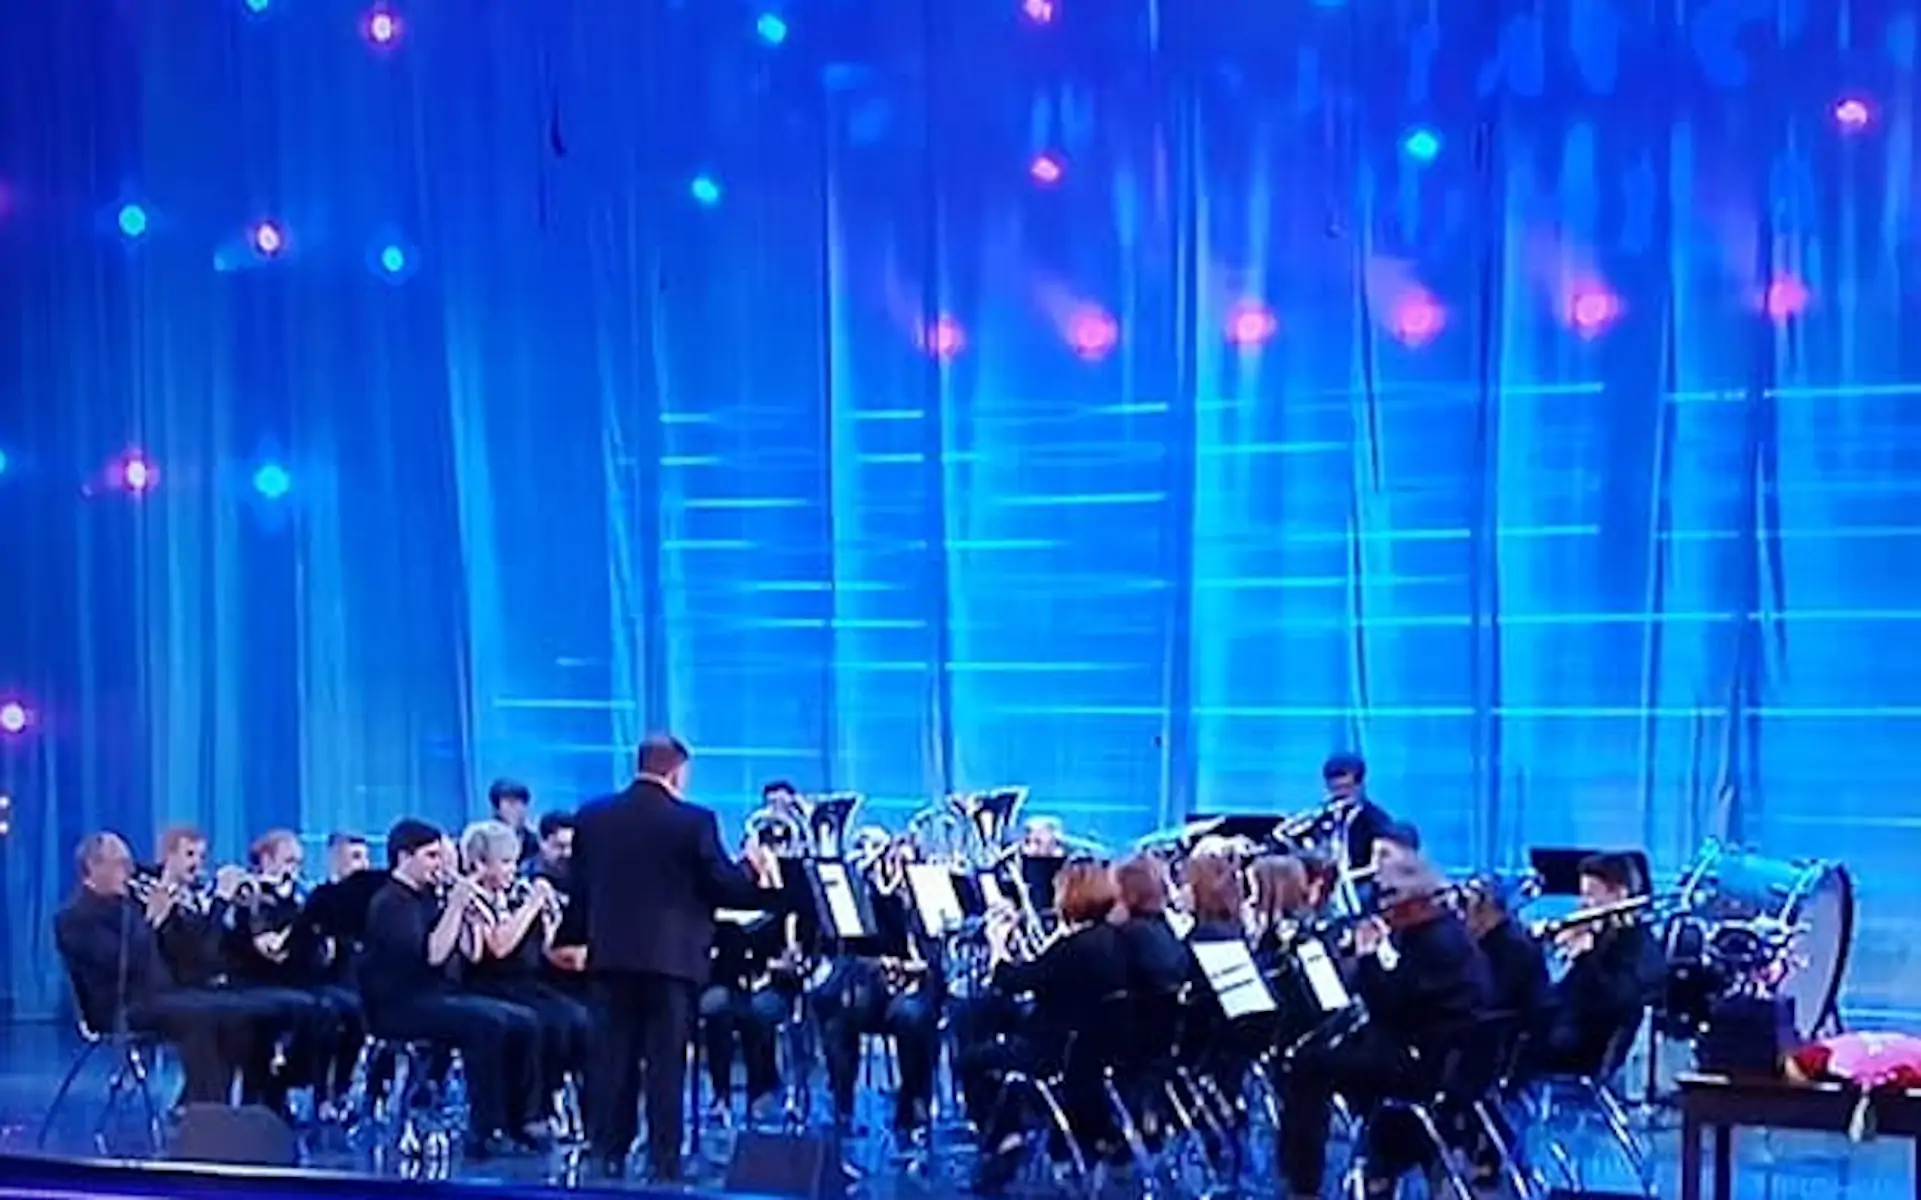 Briton Ferry Silver Band on a brightly lit blue stage at the National Eisteddfod contest.